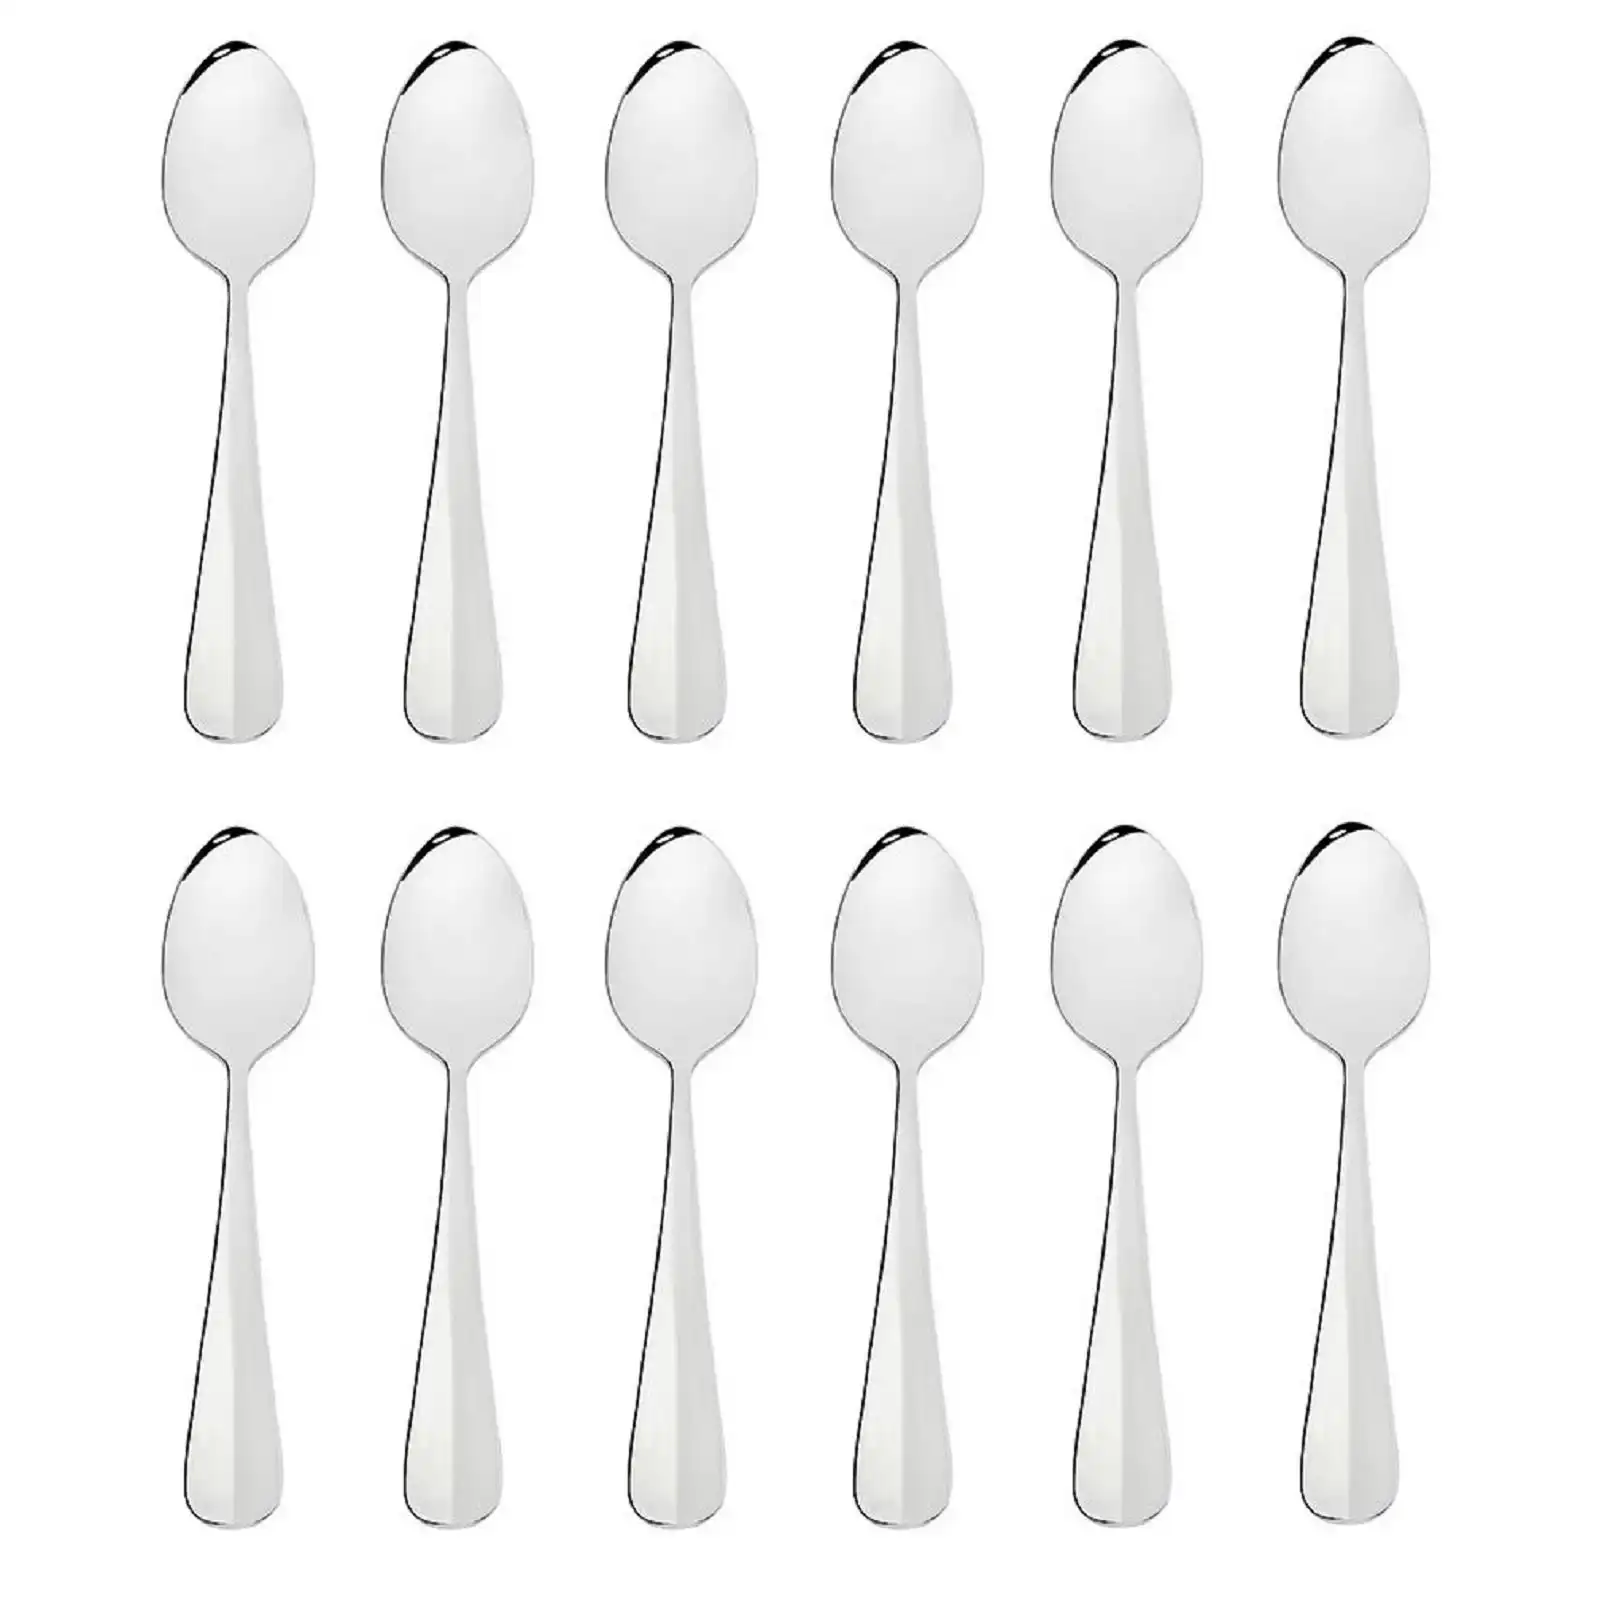 Stanley Rogers Baguette Coffee Spoons   12 Pieces